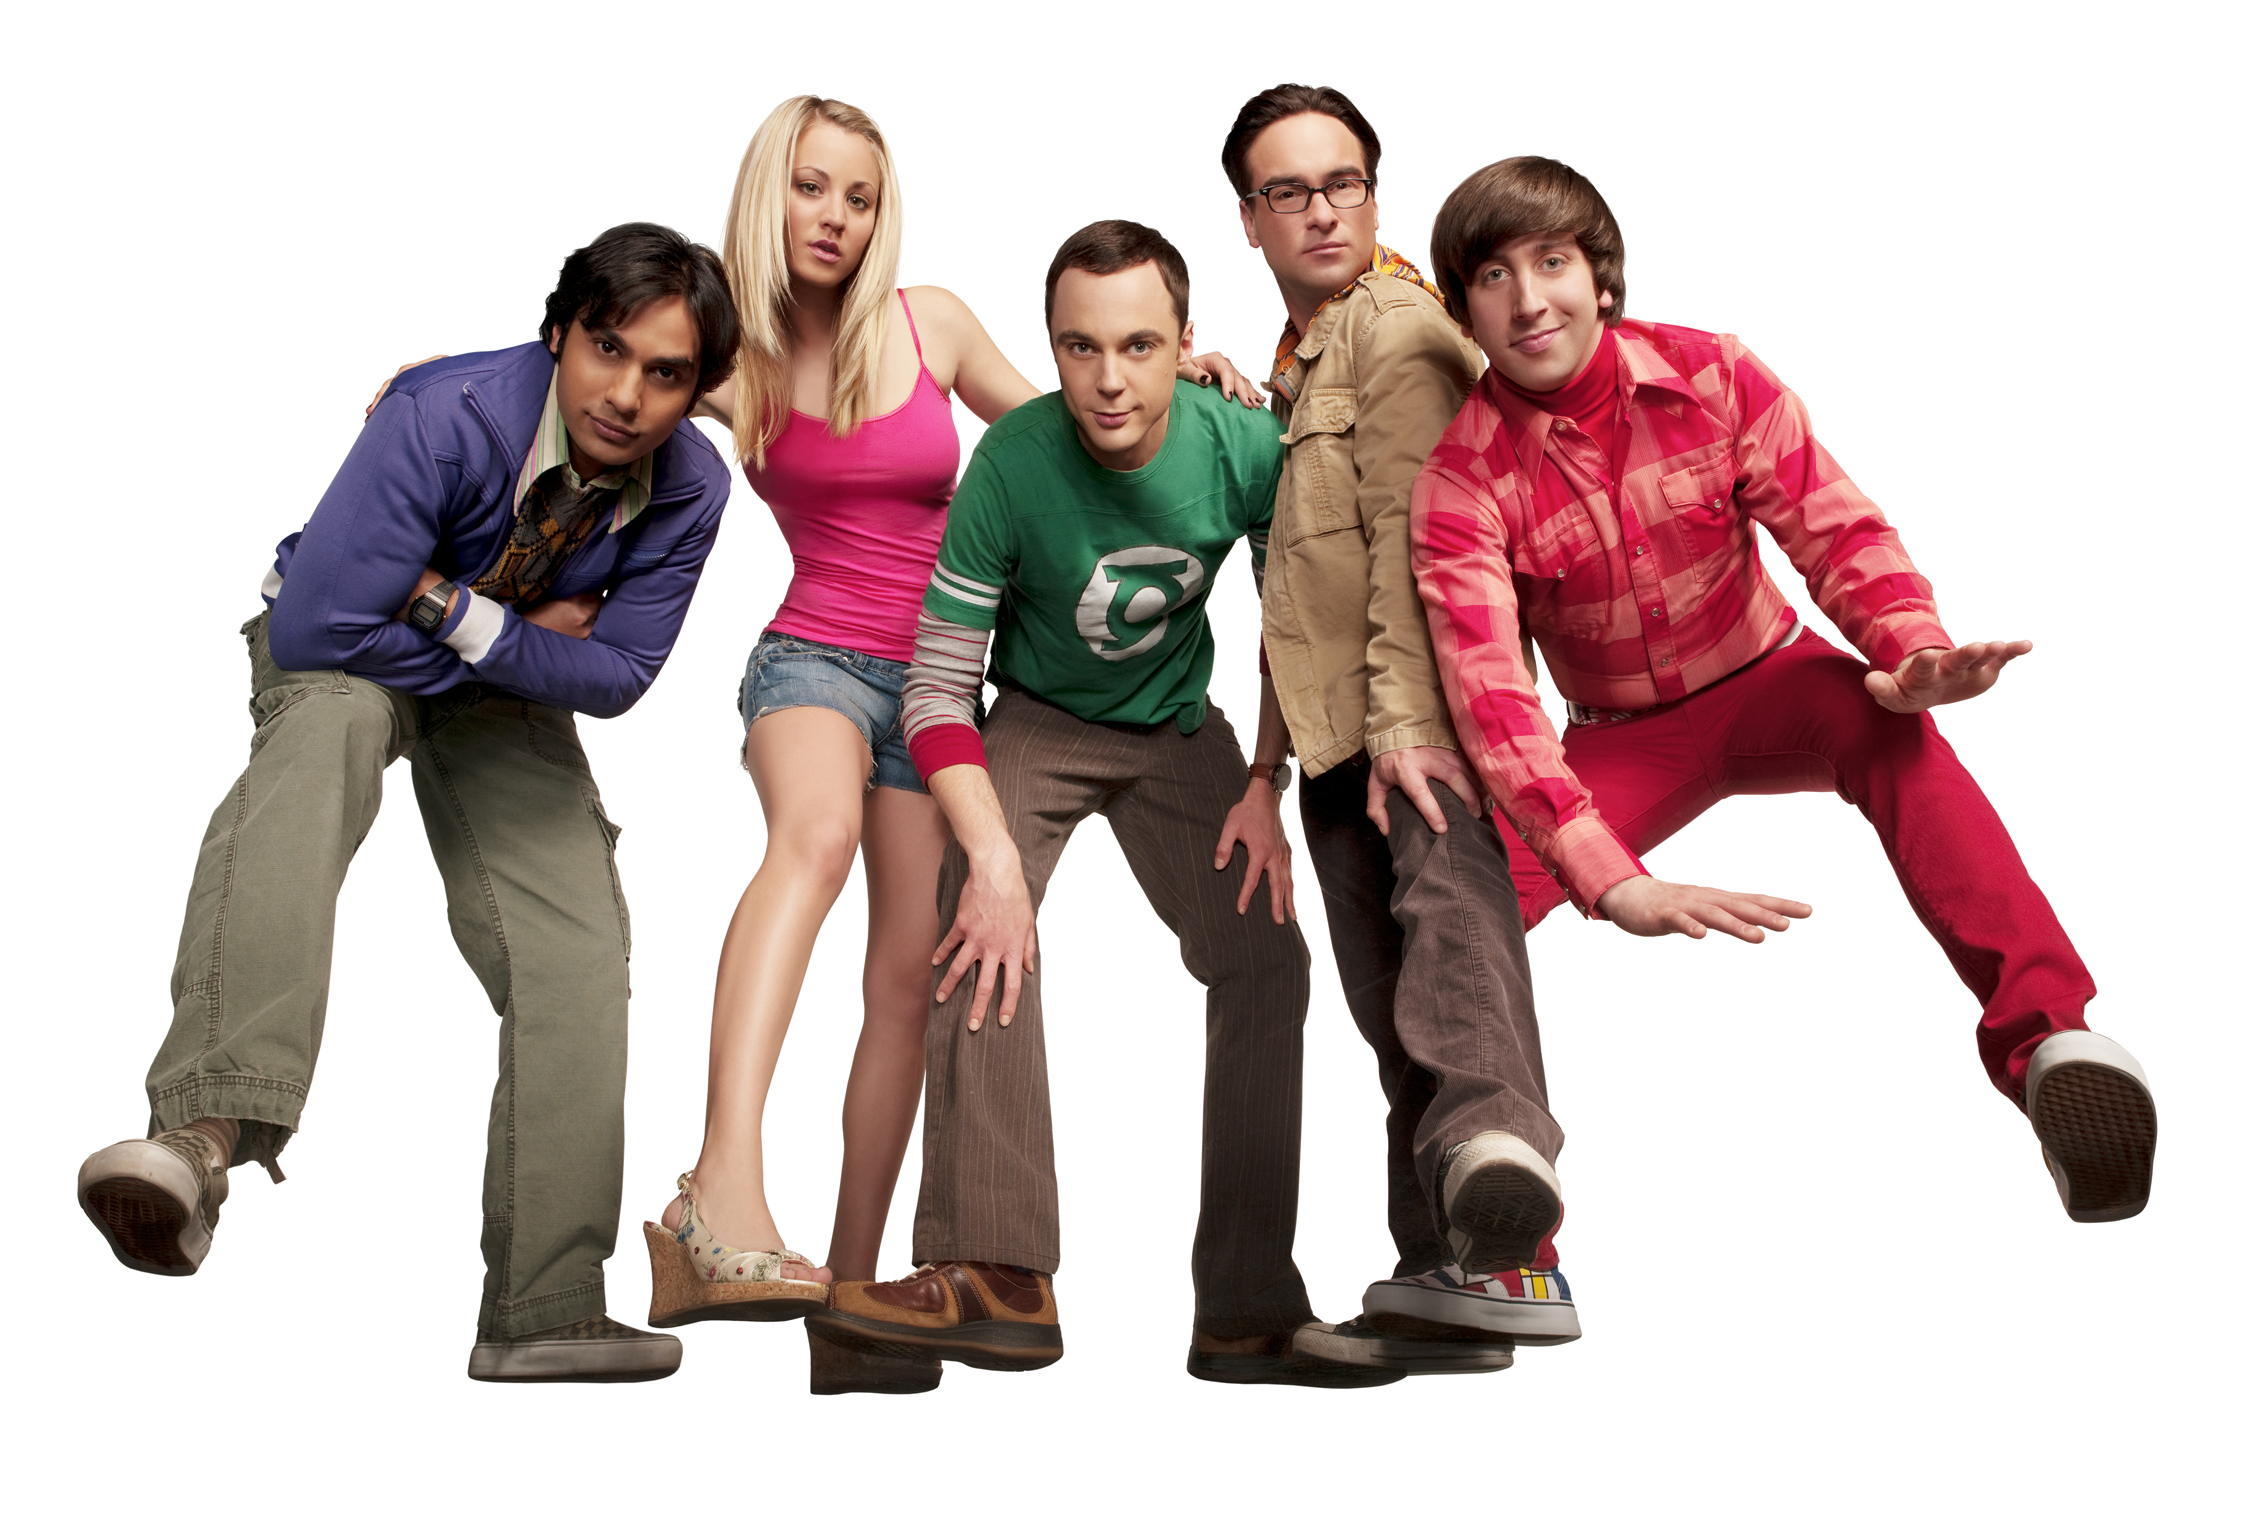 big bang theory download bittorrent for windows